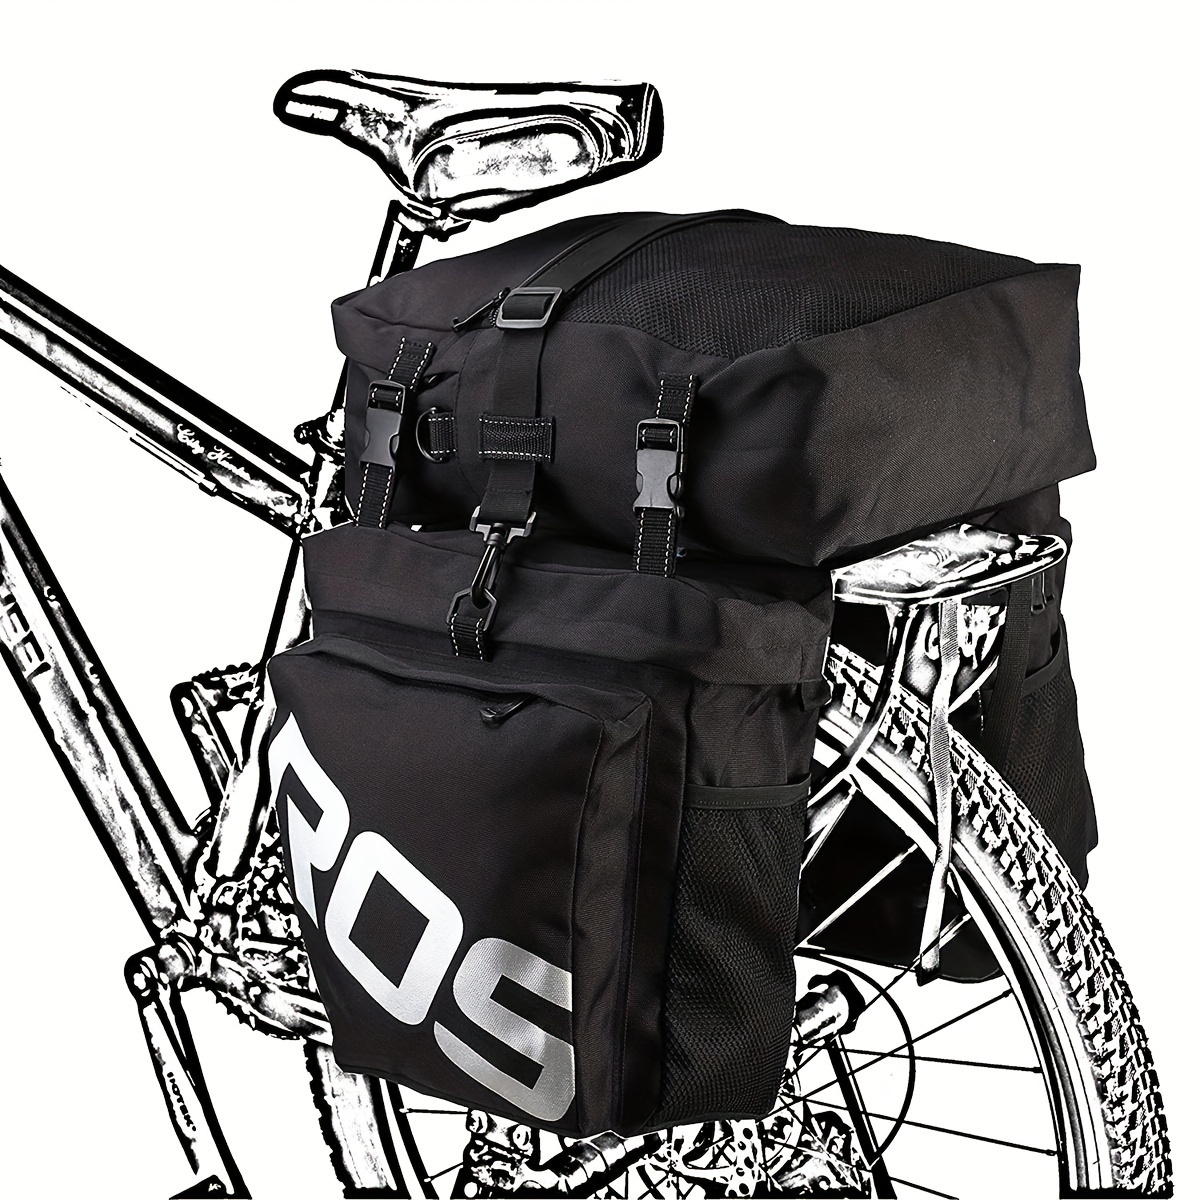 

1pc Ros 3-in-1 Bicycle Pannier Bags, Waterproof Rear Rack Cargo Carrier For Mountain Bikes, Durable Cycling Accessories, Reflective Black Outdoor Bags